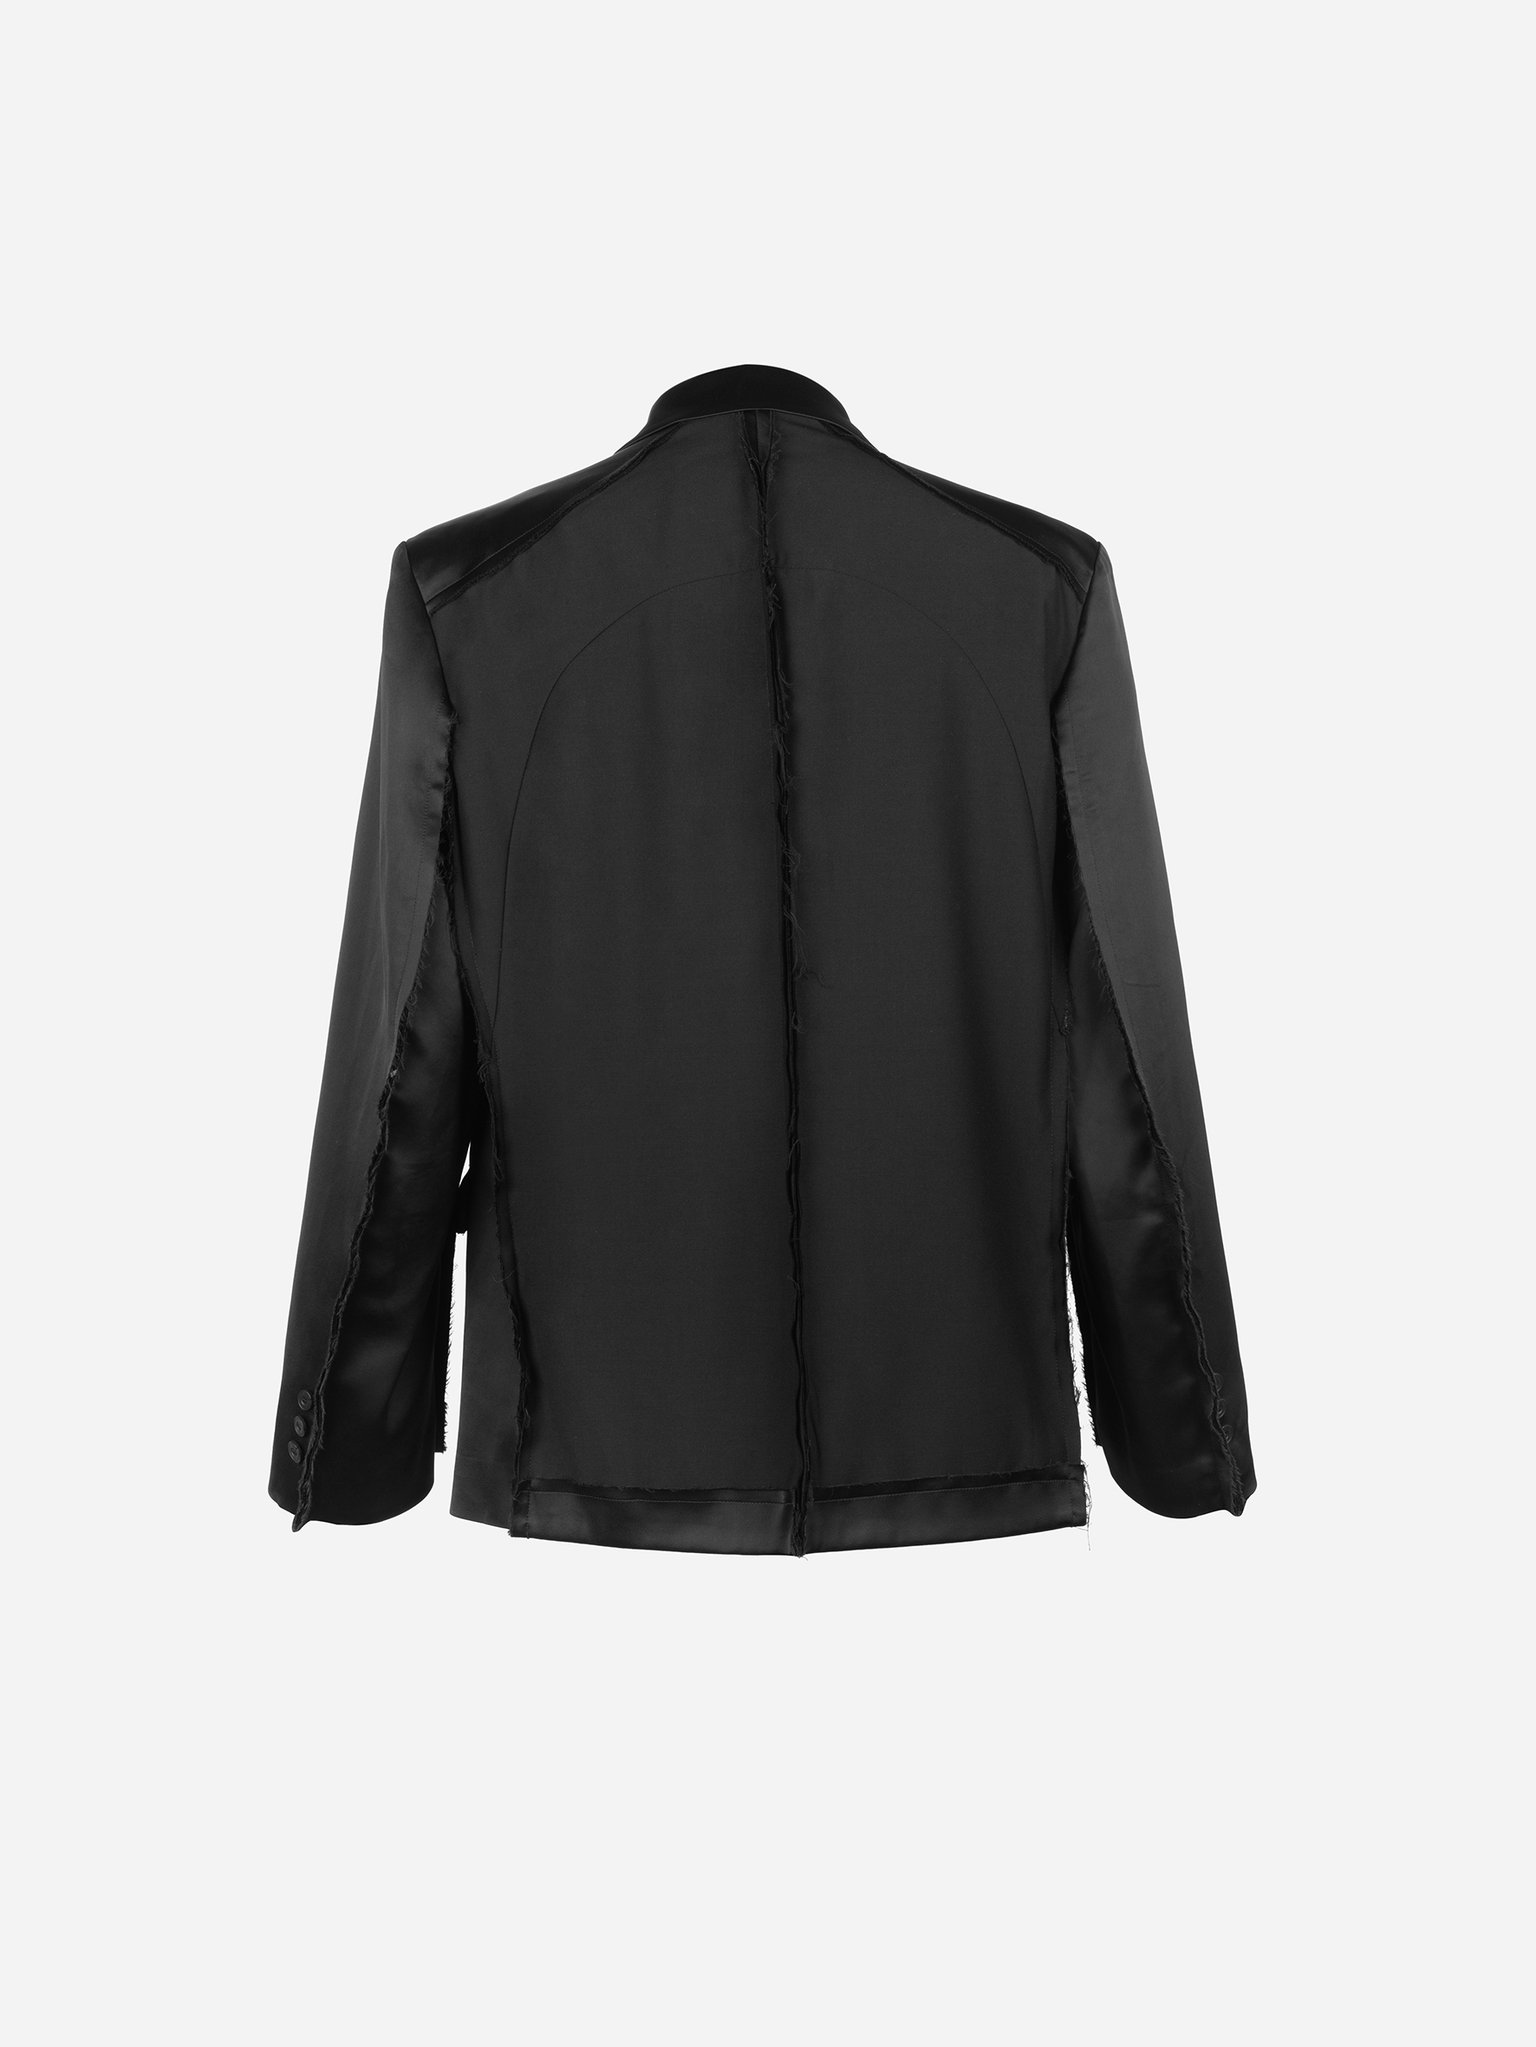 Inside-out Panelled Smoke Tailored Jacket